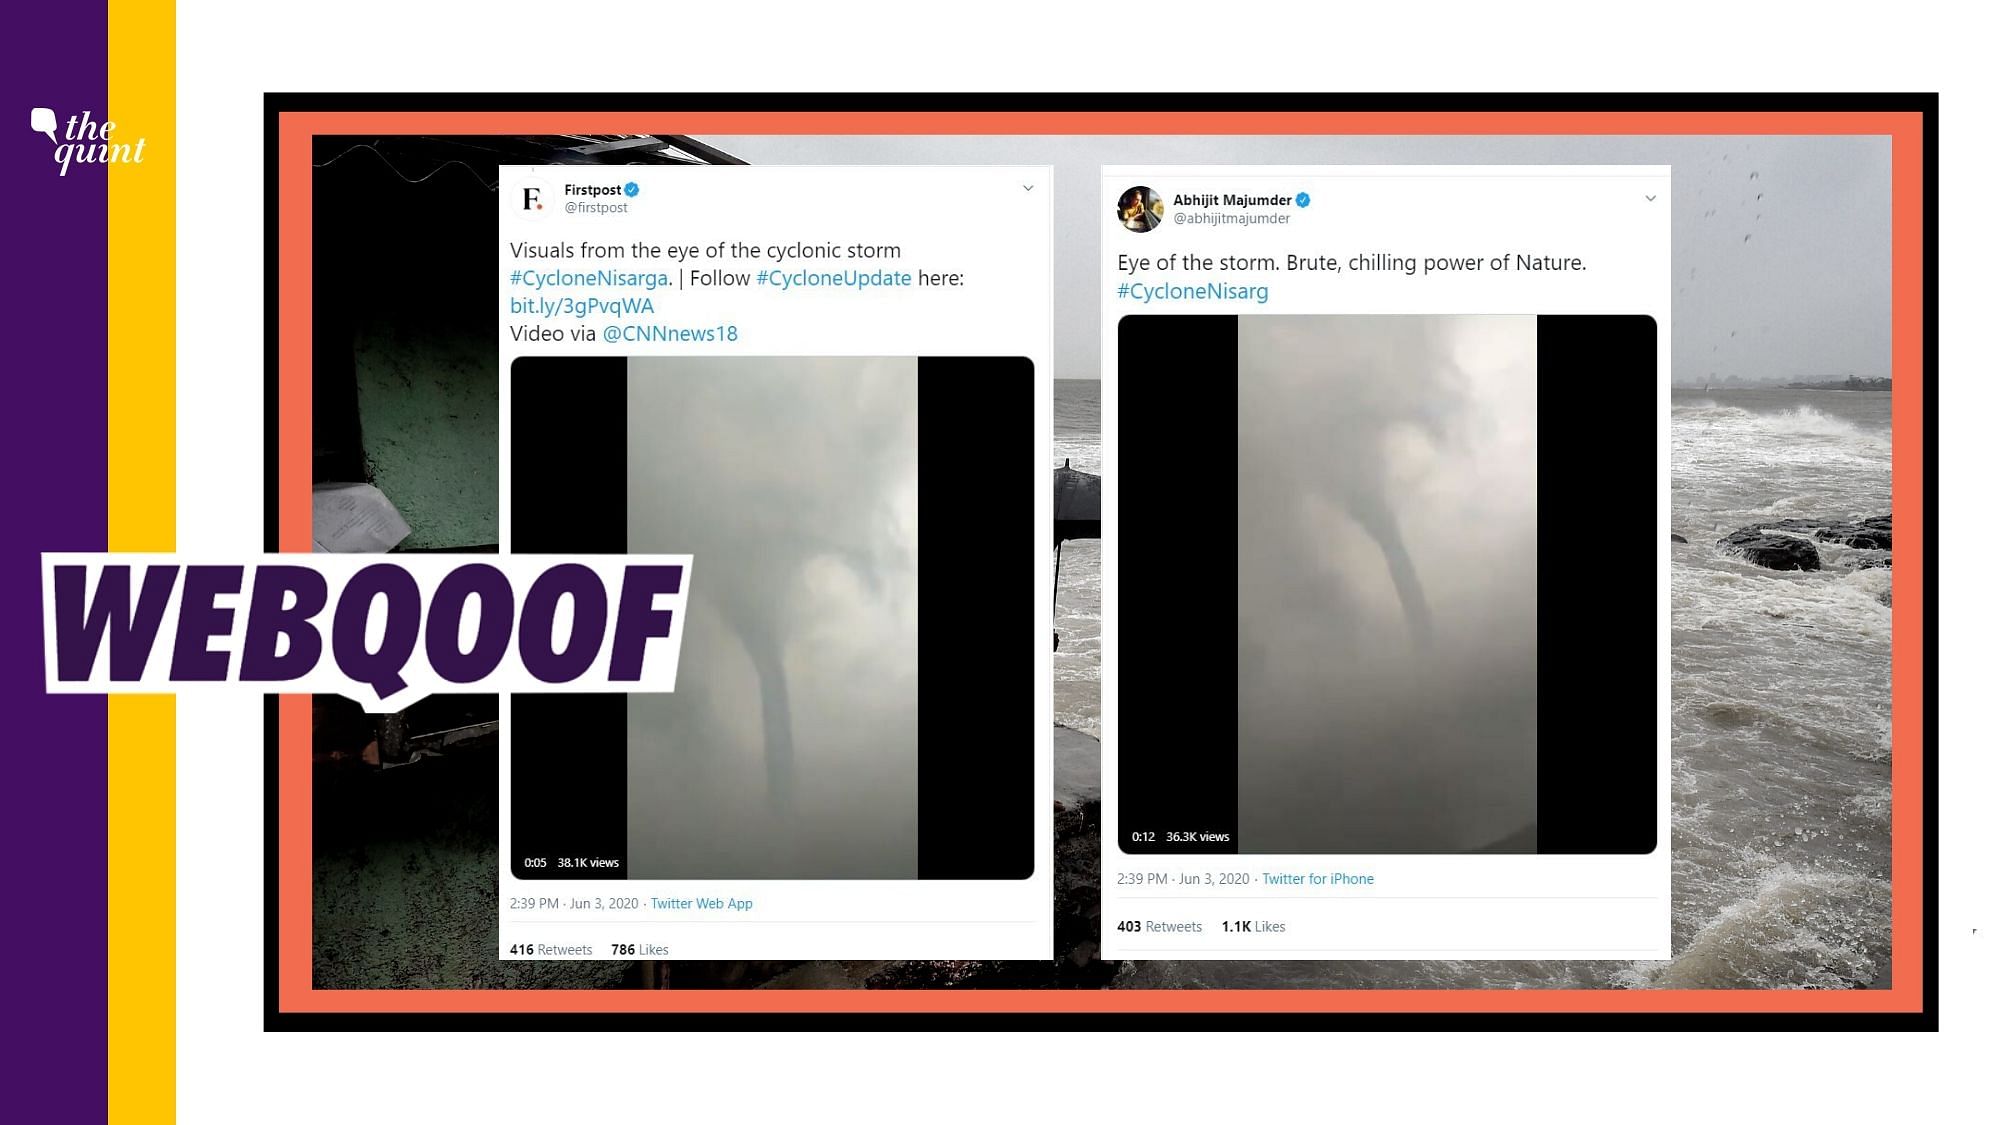 A video which could be traced back to 2019, is being shared with a claim that it shows visuals from the eye of the cyclonic storm.